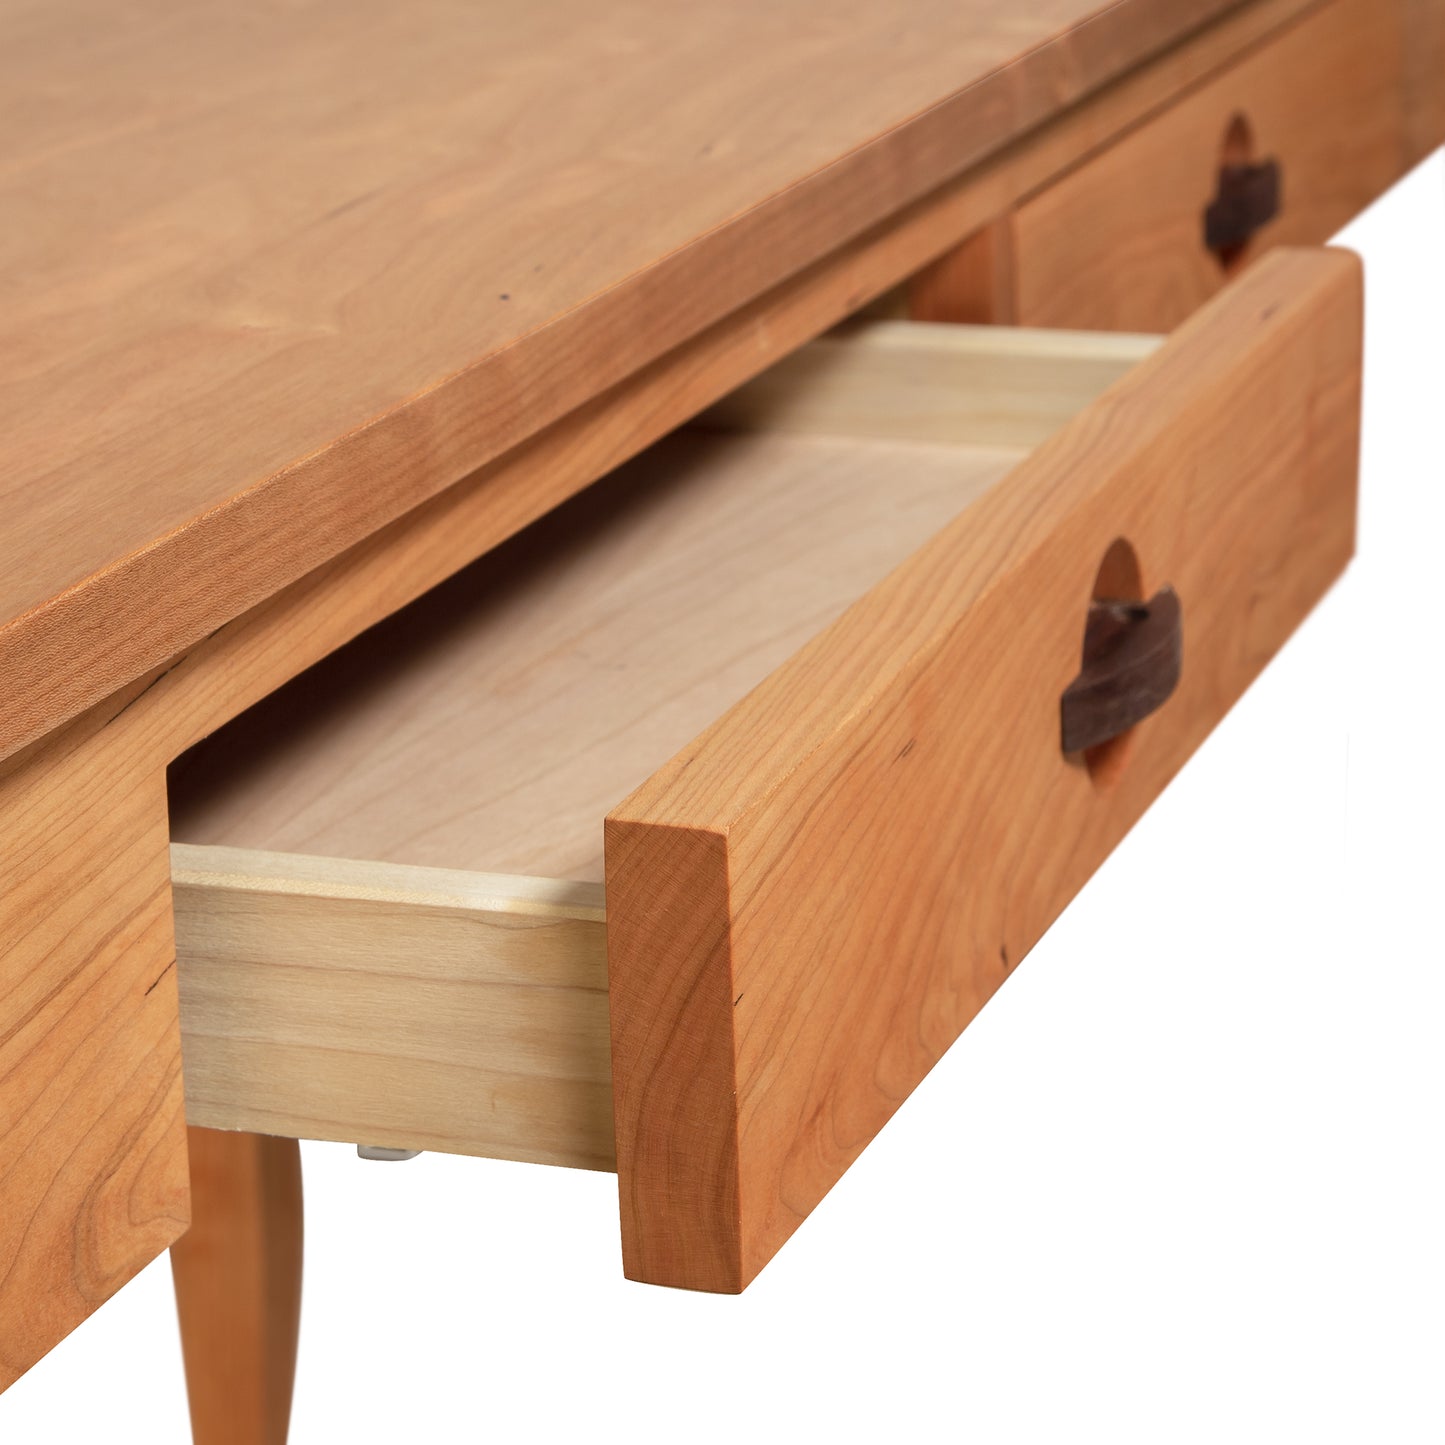 A Ryegate Writing Desk with a drawer under it, manufactured by Maple Corner Woodworks.